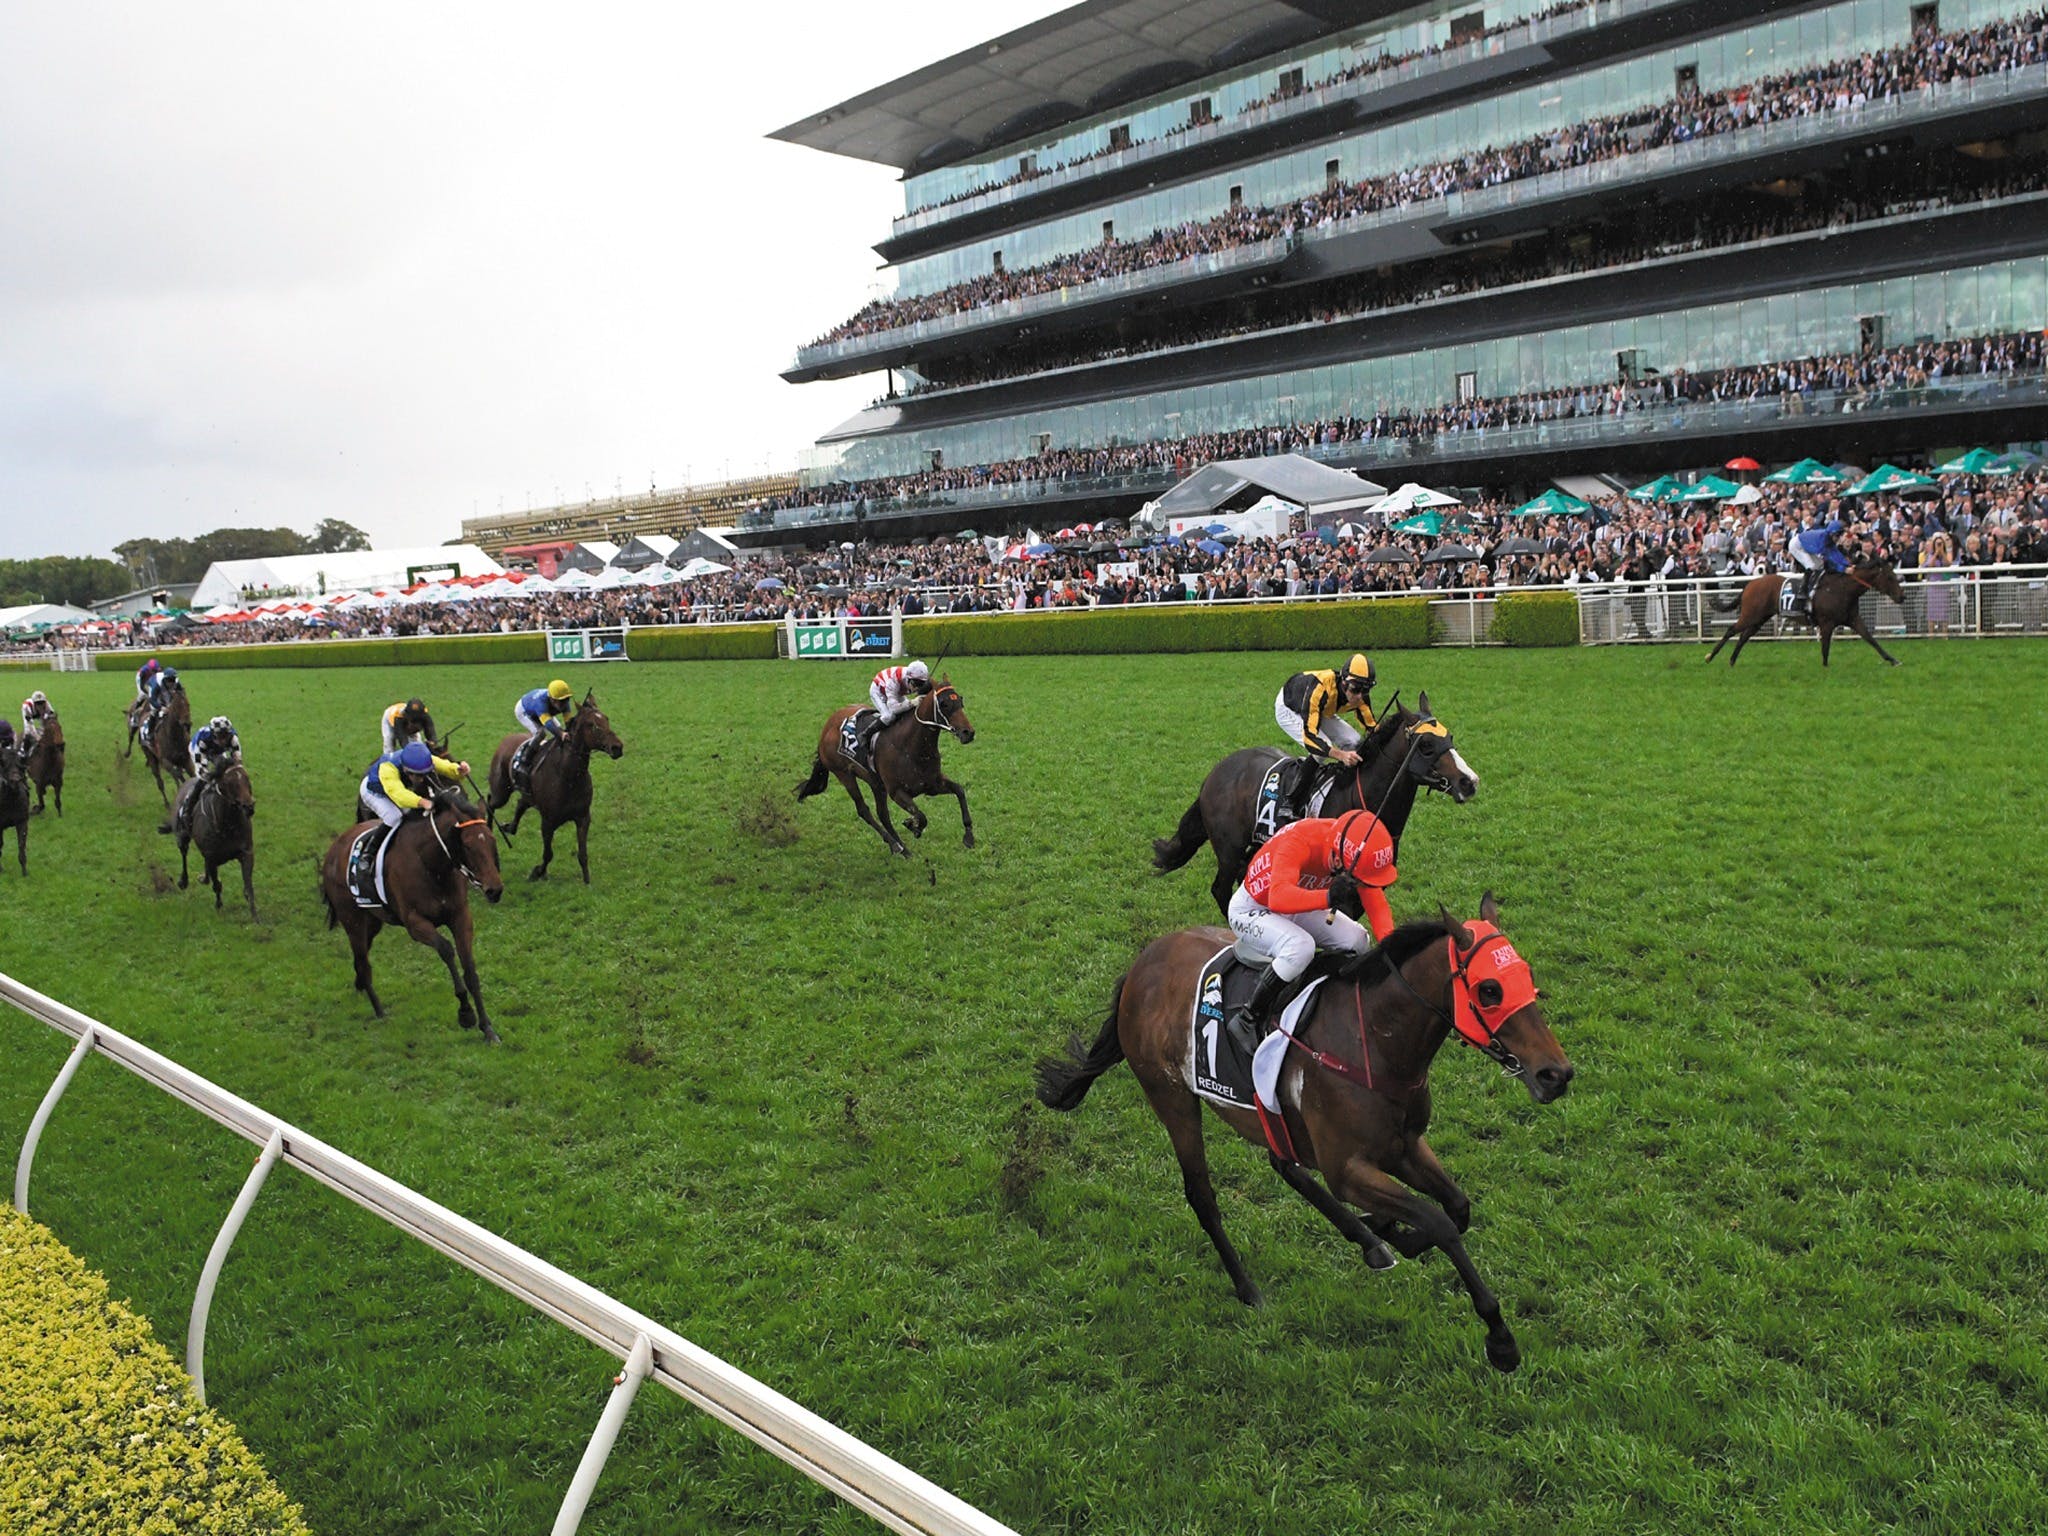 The TAB Everest The Worlds Richest Race On Turf - Melbourne Tourism